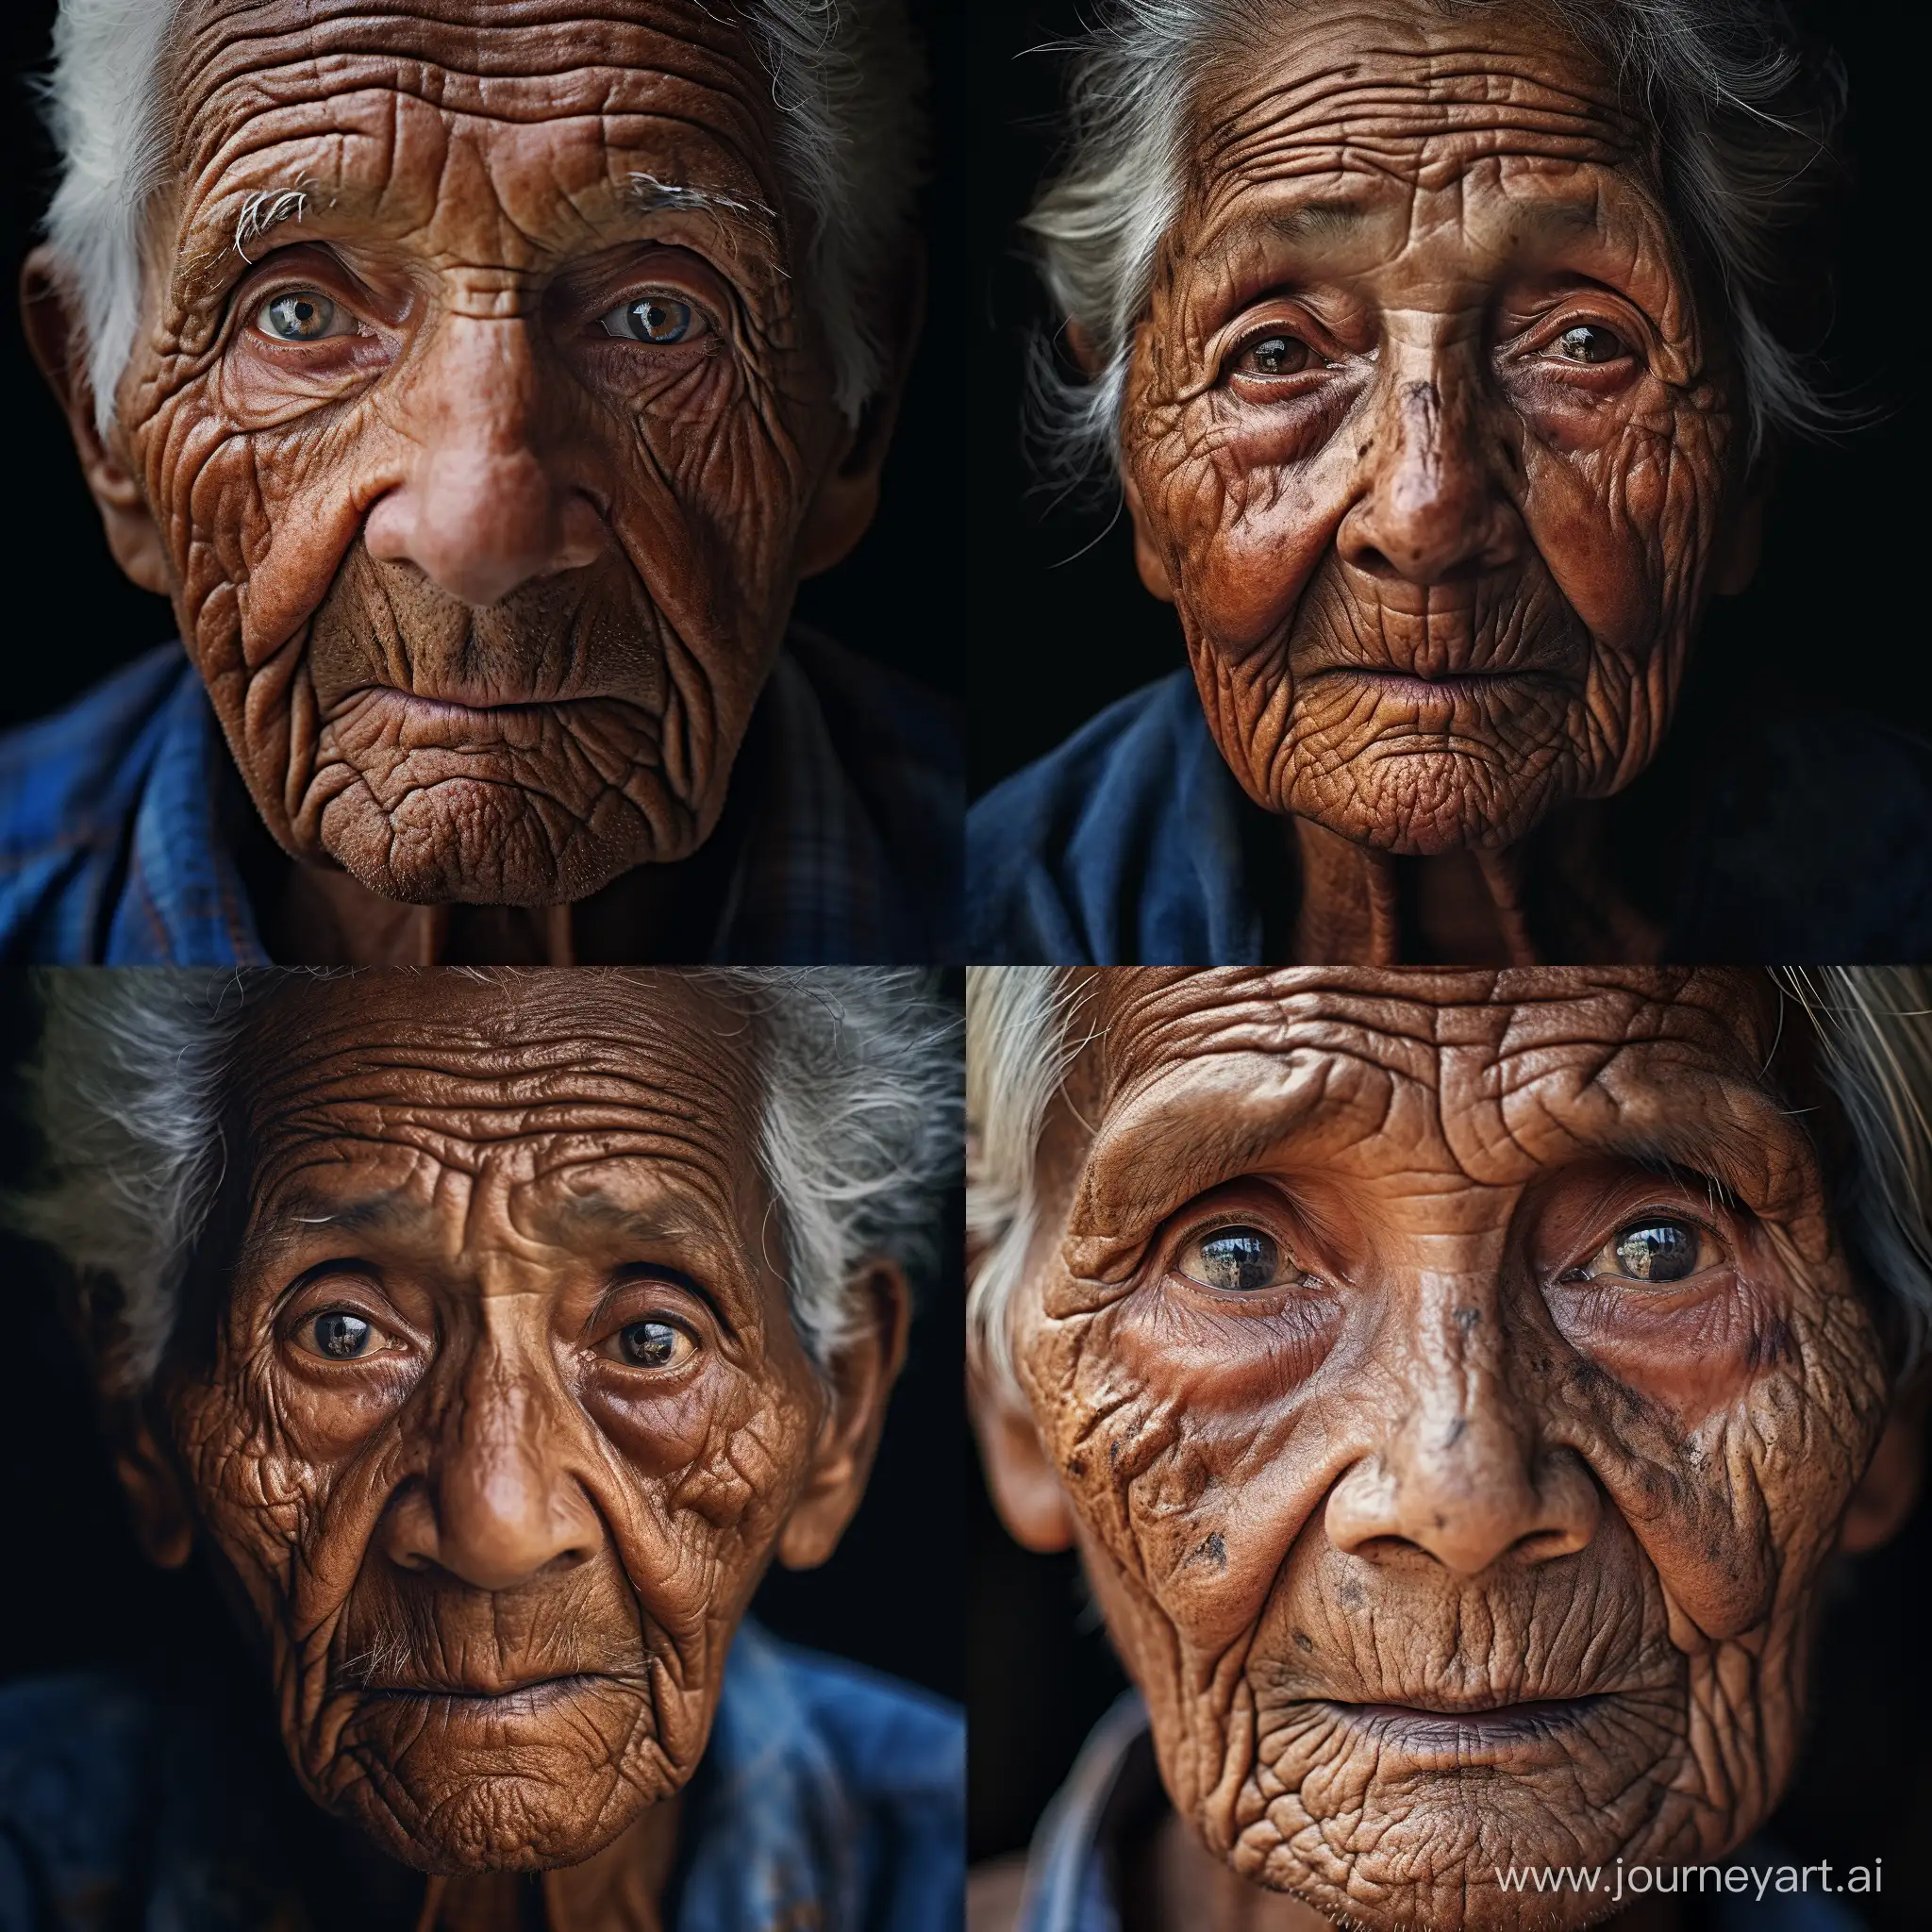 A powerful portrait of an elderly person, capturing the wrinkles, texture of the skin, and expressive eyes that tell a story of a lifetime, in high resolution and natural lighting.